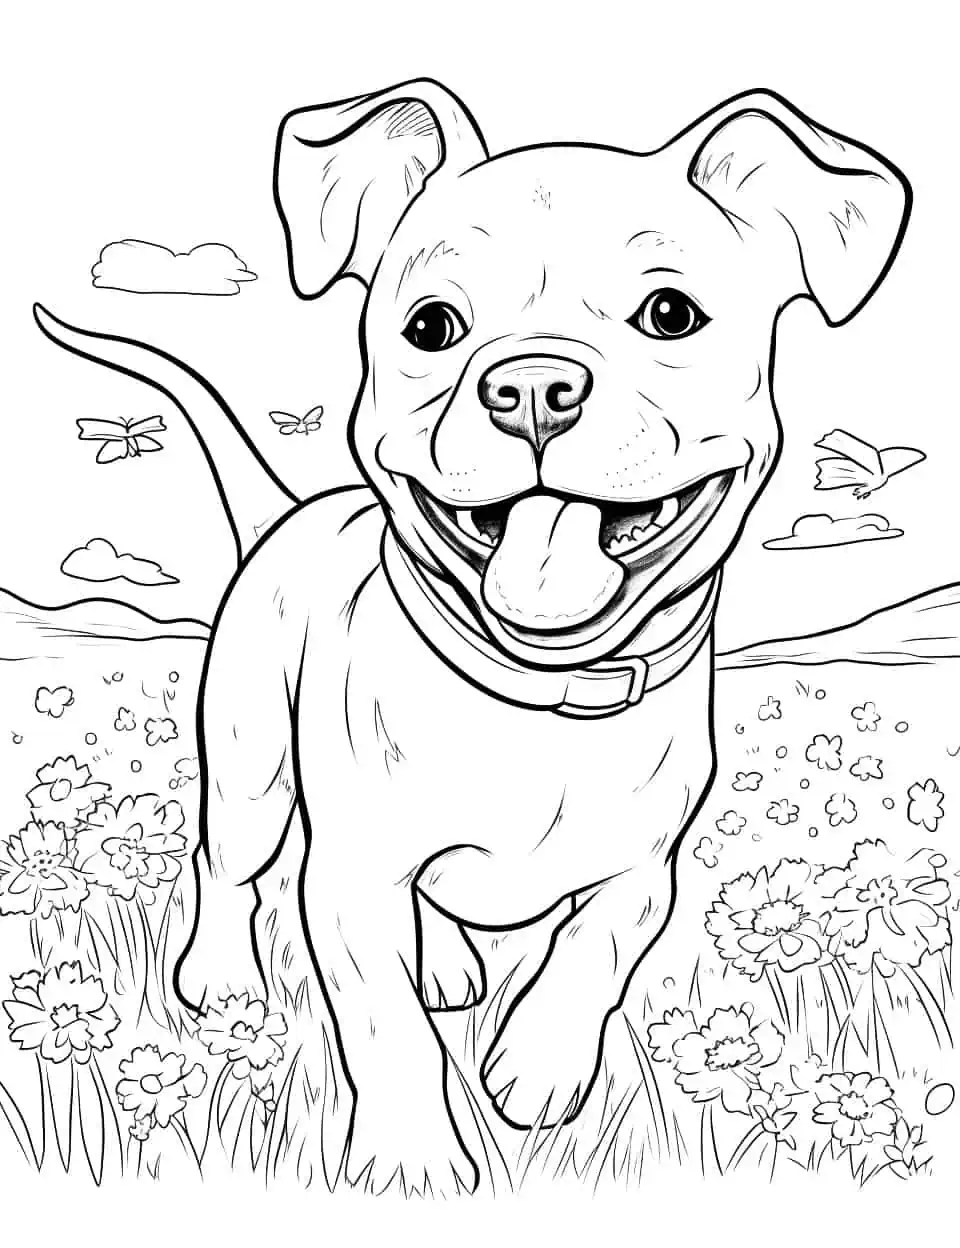 Pitbull in a Meadow Coloring Page - A cheerful Pitbull running freely in a meadow full of flowers.